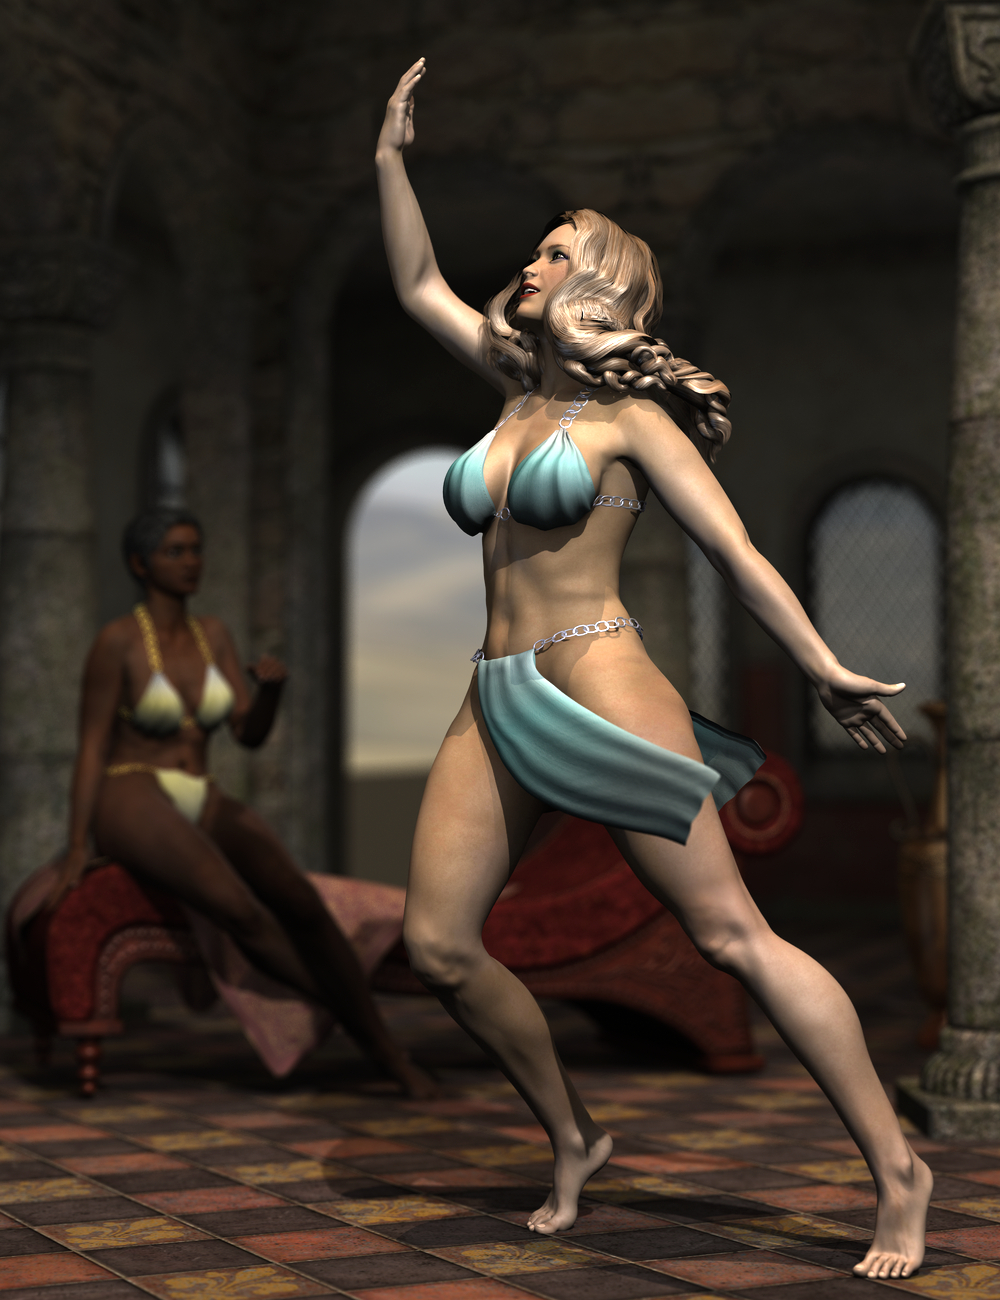 Curvaceous Olympia 6 by: Sickleyield, 3D Models by Daz 3D